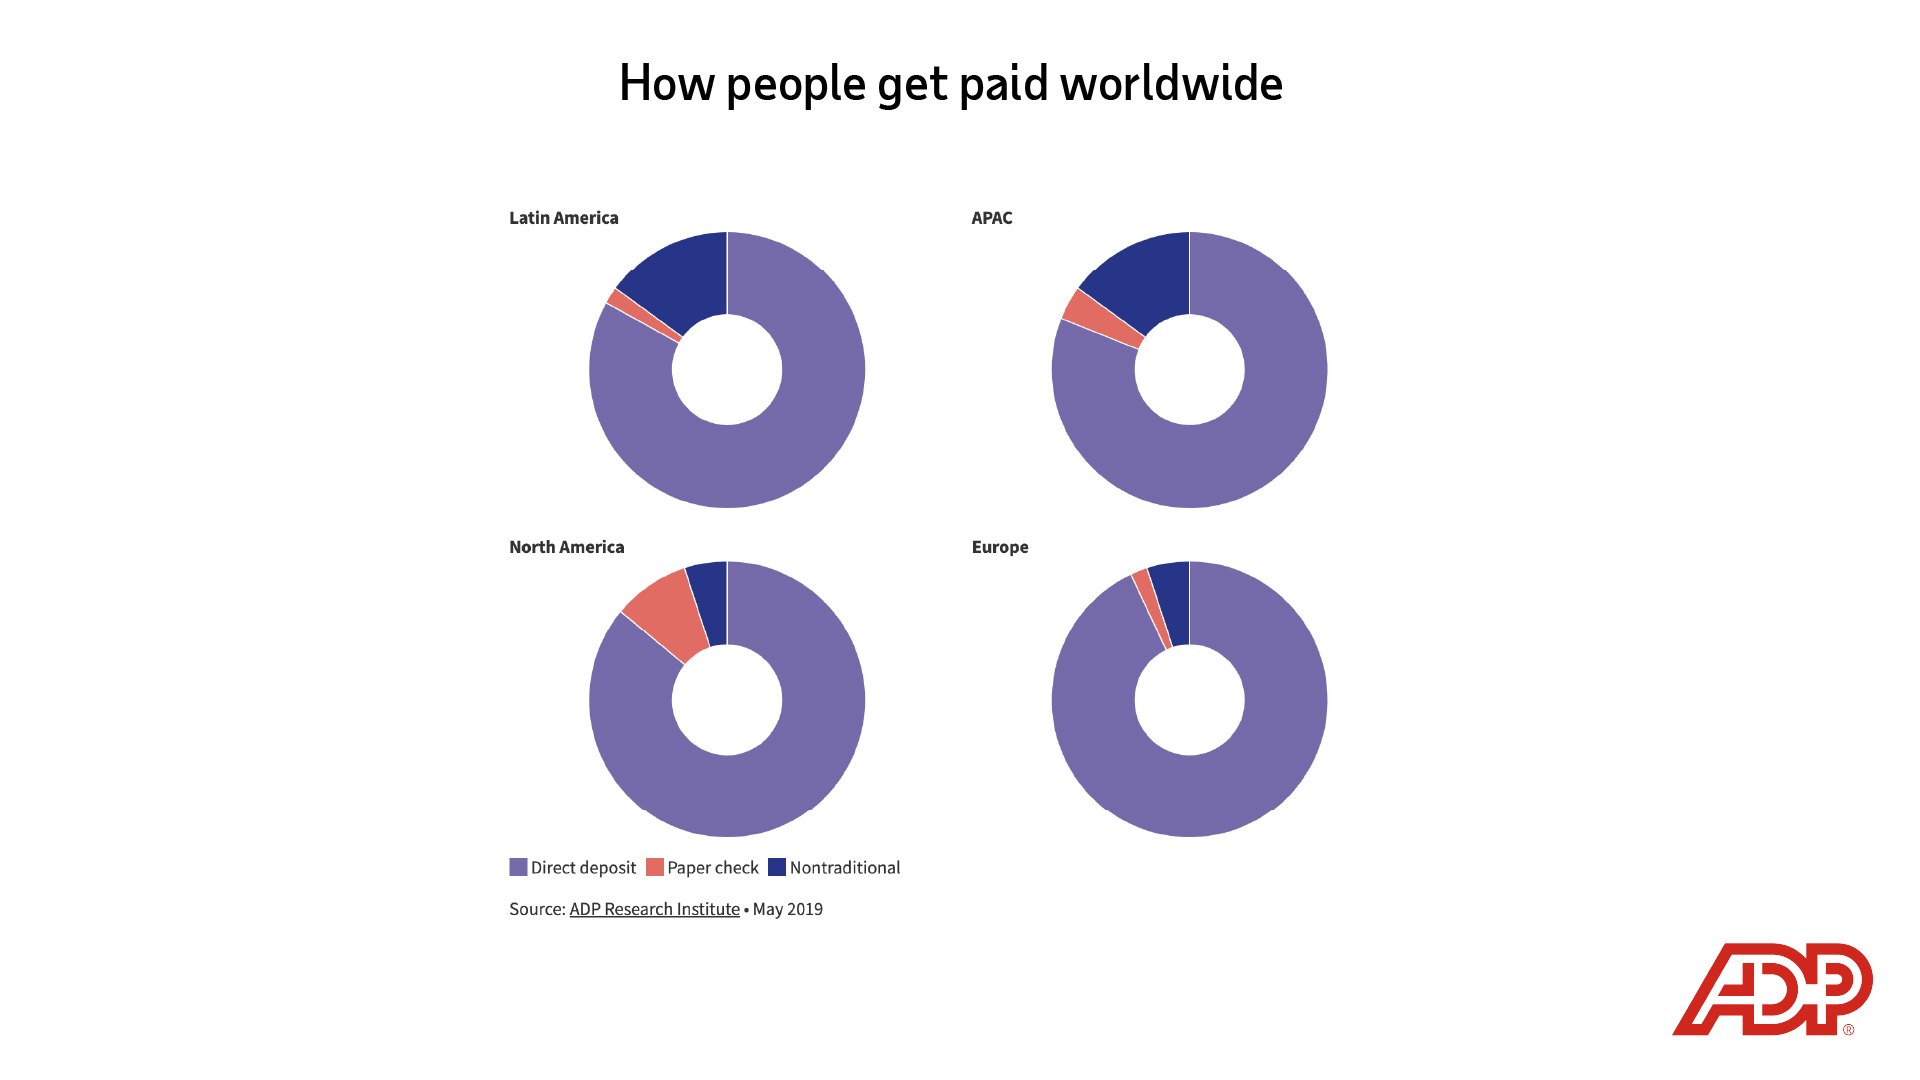 Image description: Pie chart depicting "how people get paid worldwide", split between "direct deposit," "paper check" and "nontraditional." End of alt text.